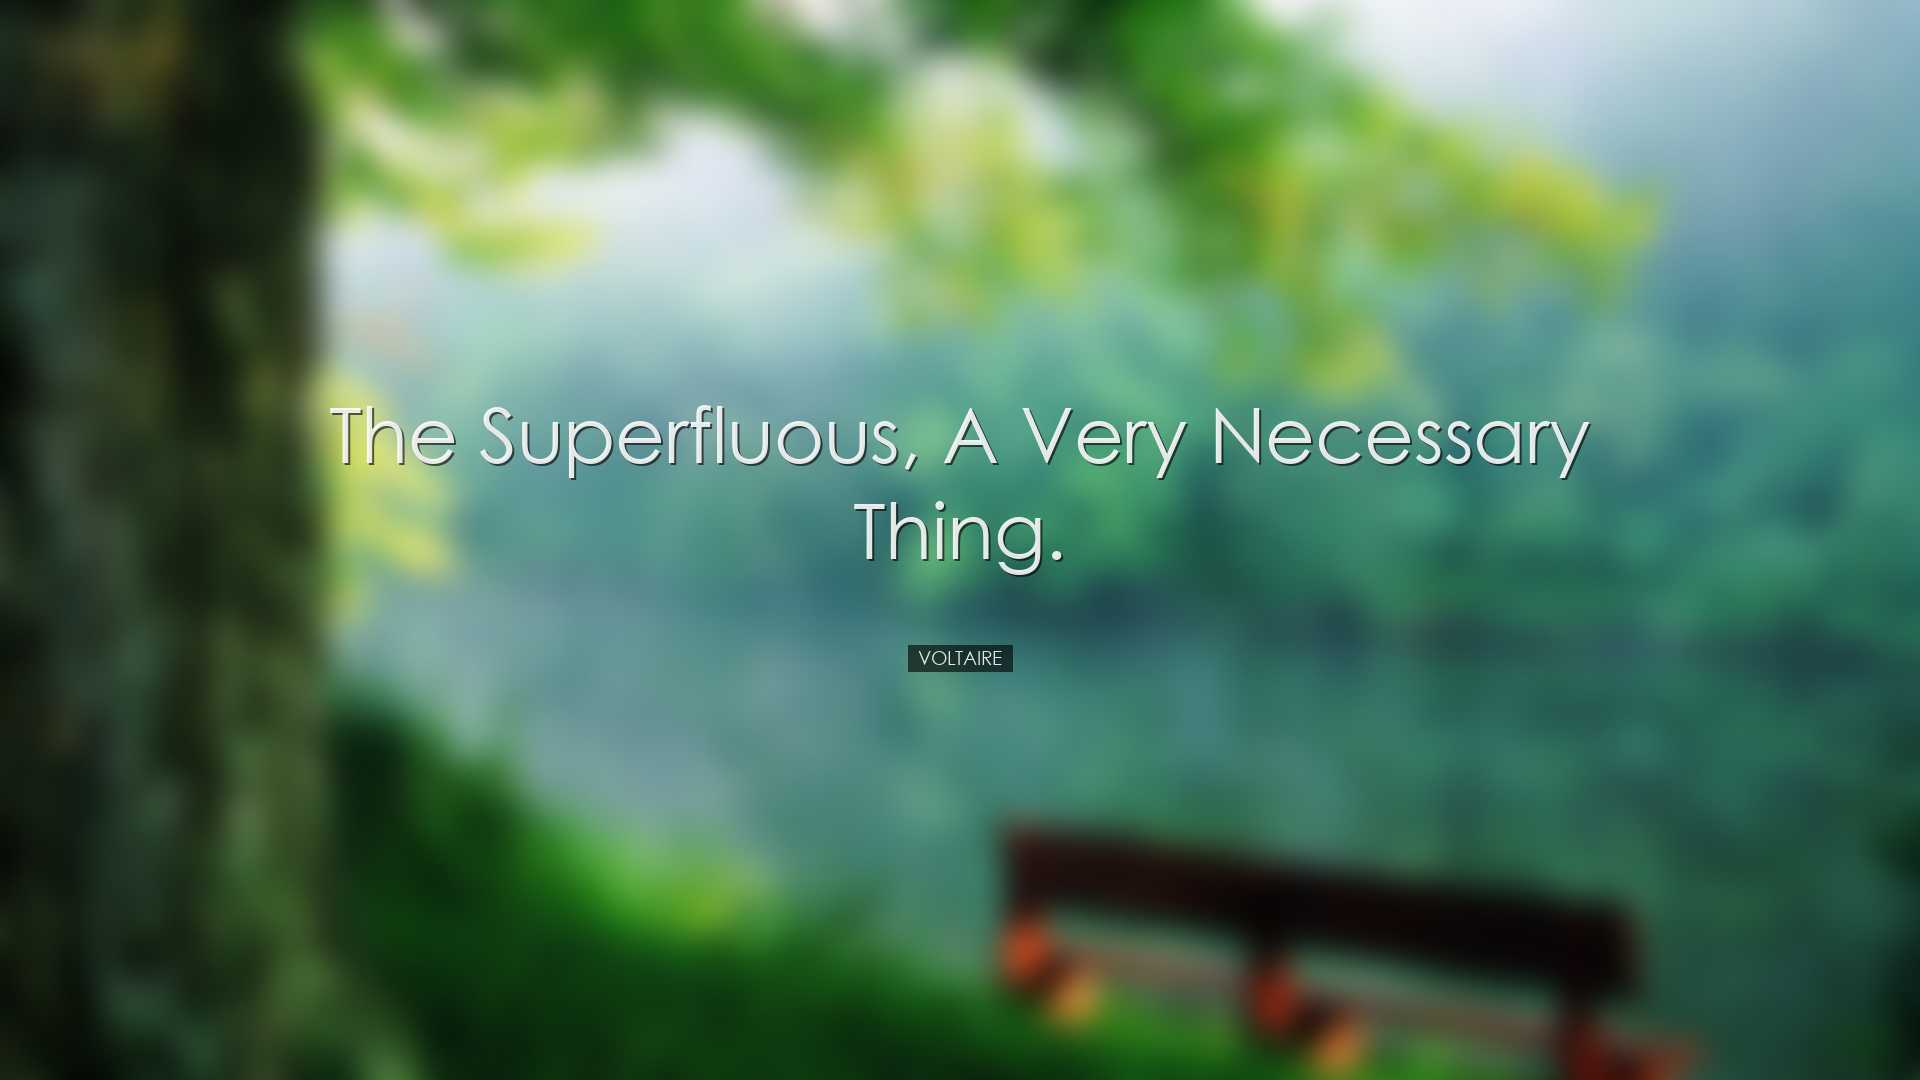 The superfluous, a very necessary thing. - Voltaire